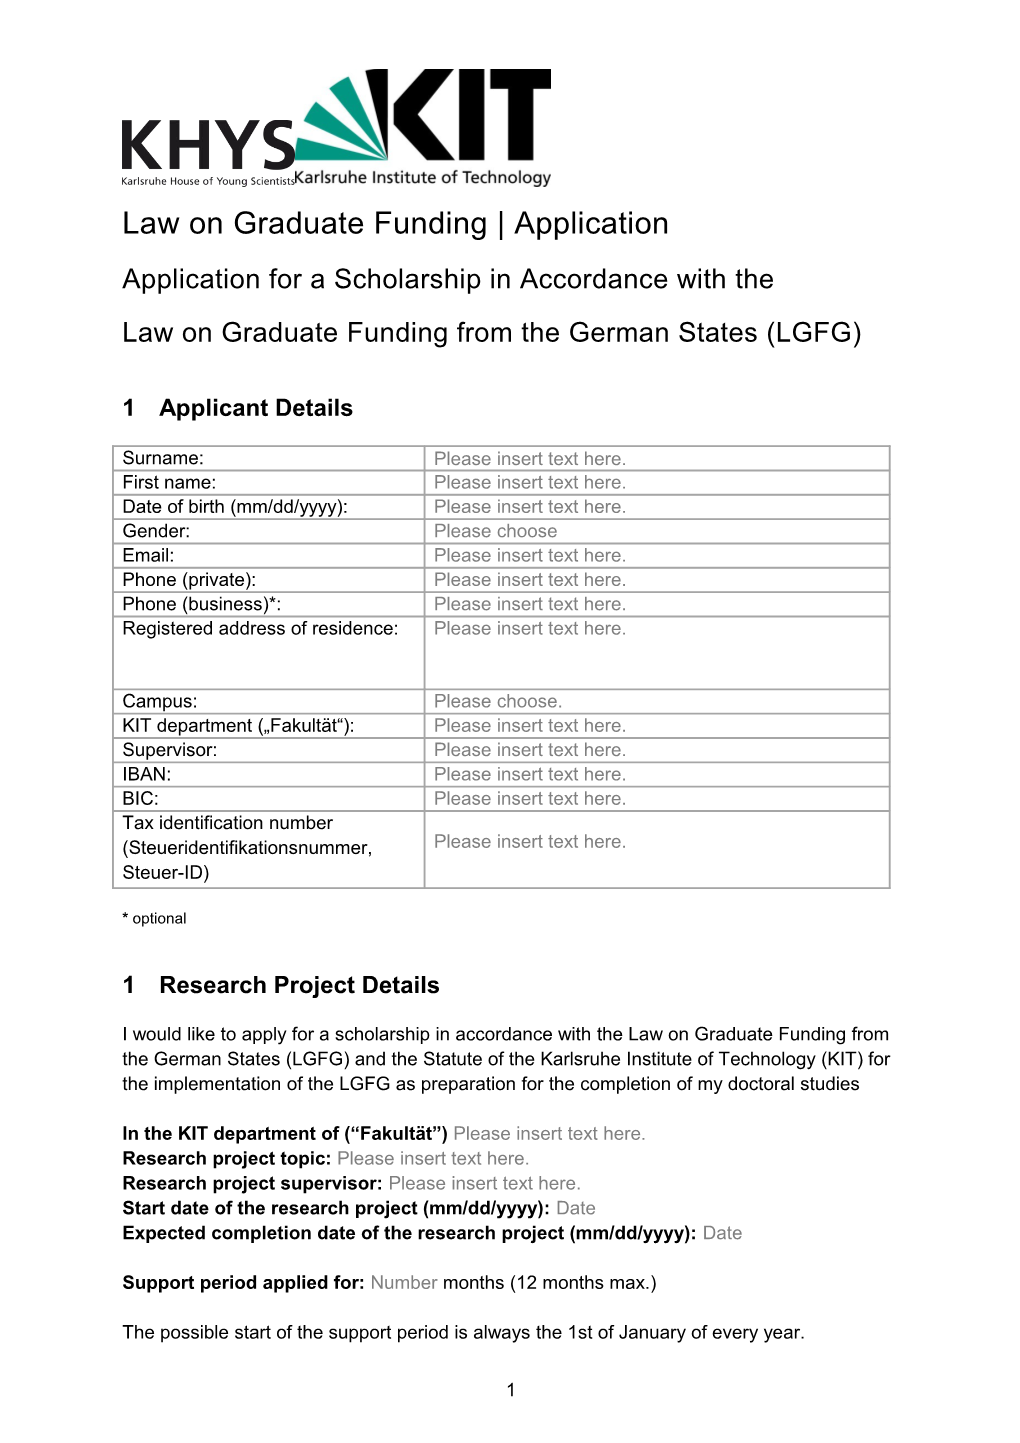 Law on Graduate Funding Application